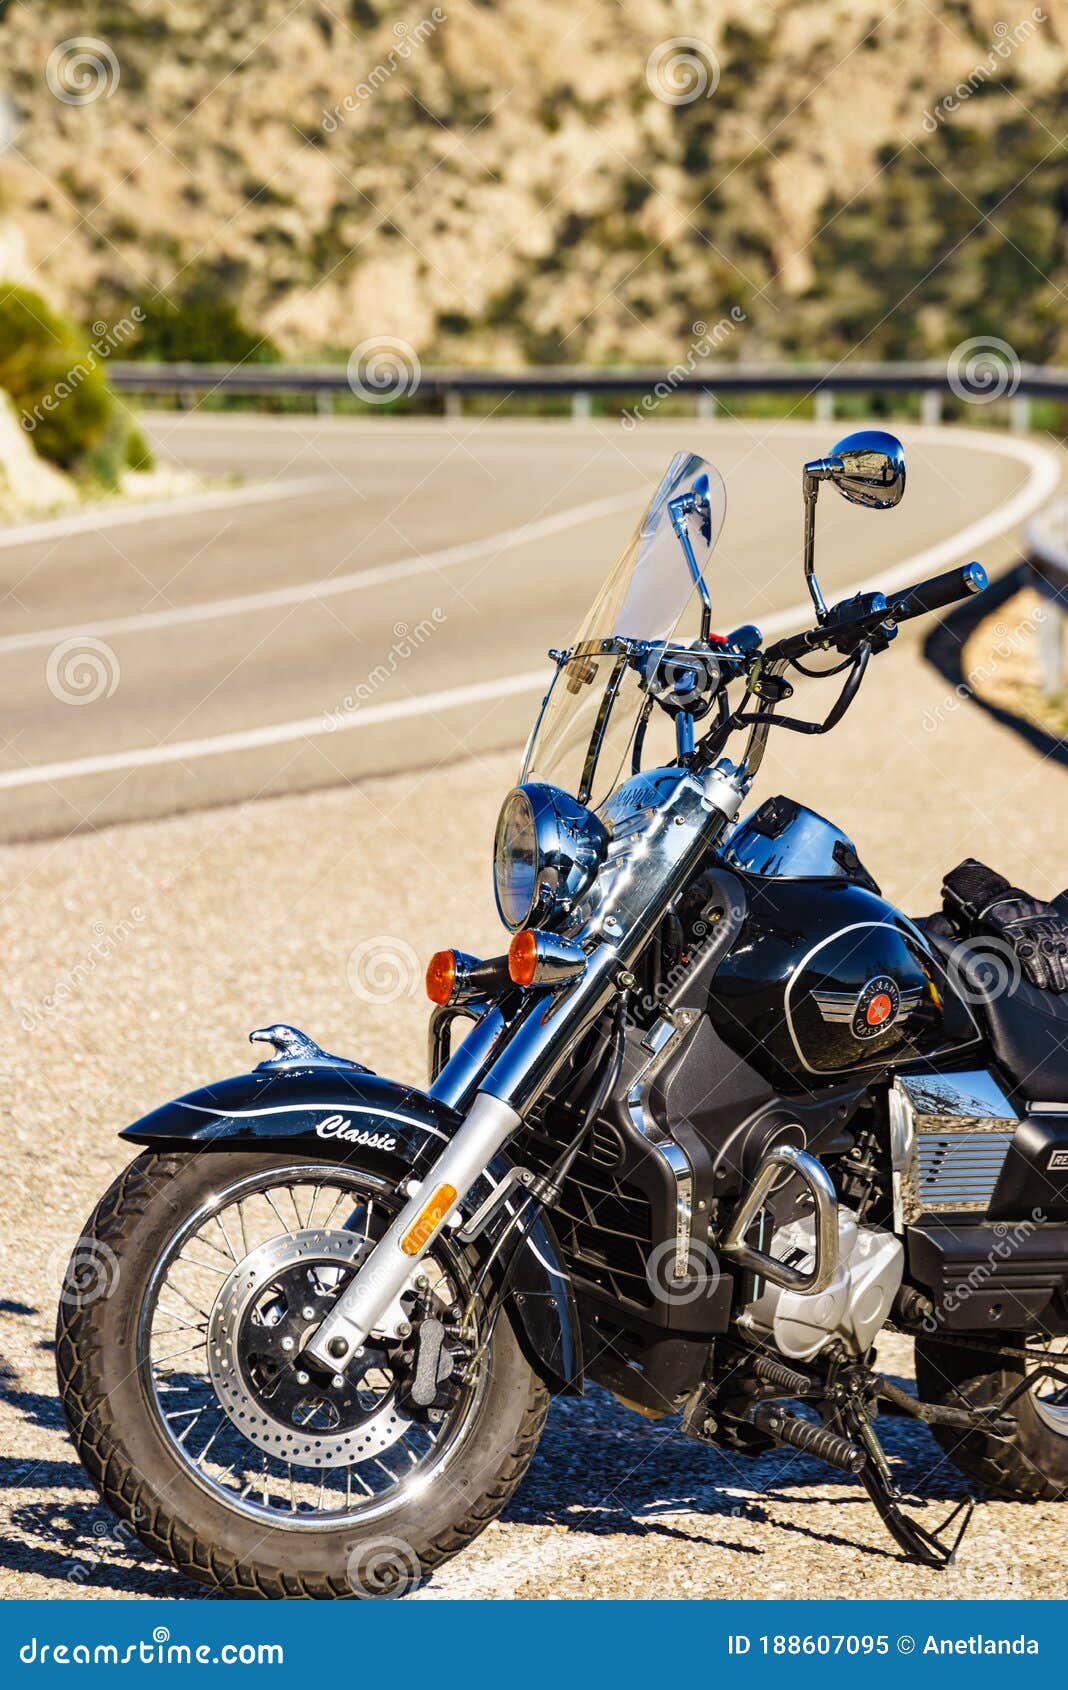 Motorcycle UM Renegade Commando Classic with Axxis Helmet, 5 January 2020,  Spain Editorial Image - Image of travel, renegade: 188607095